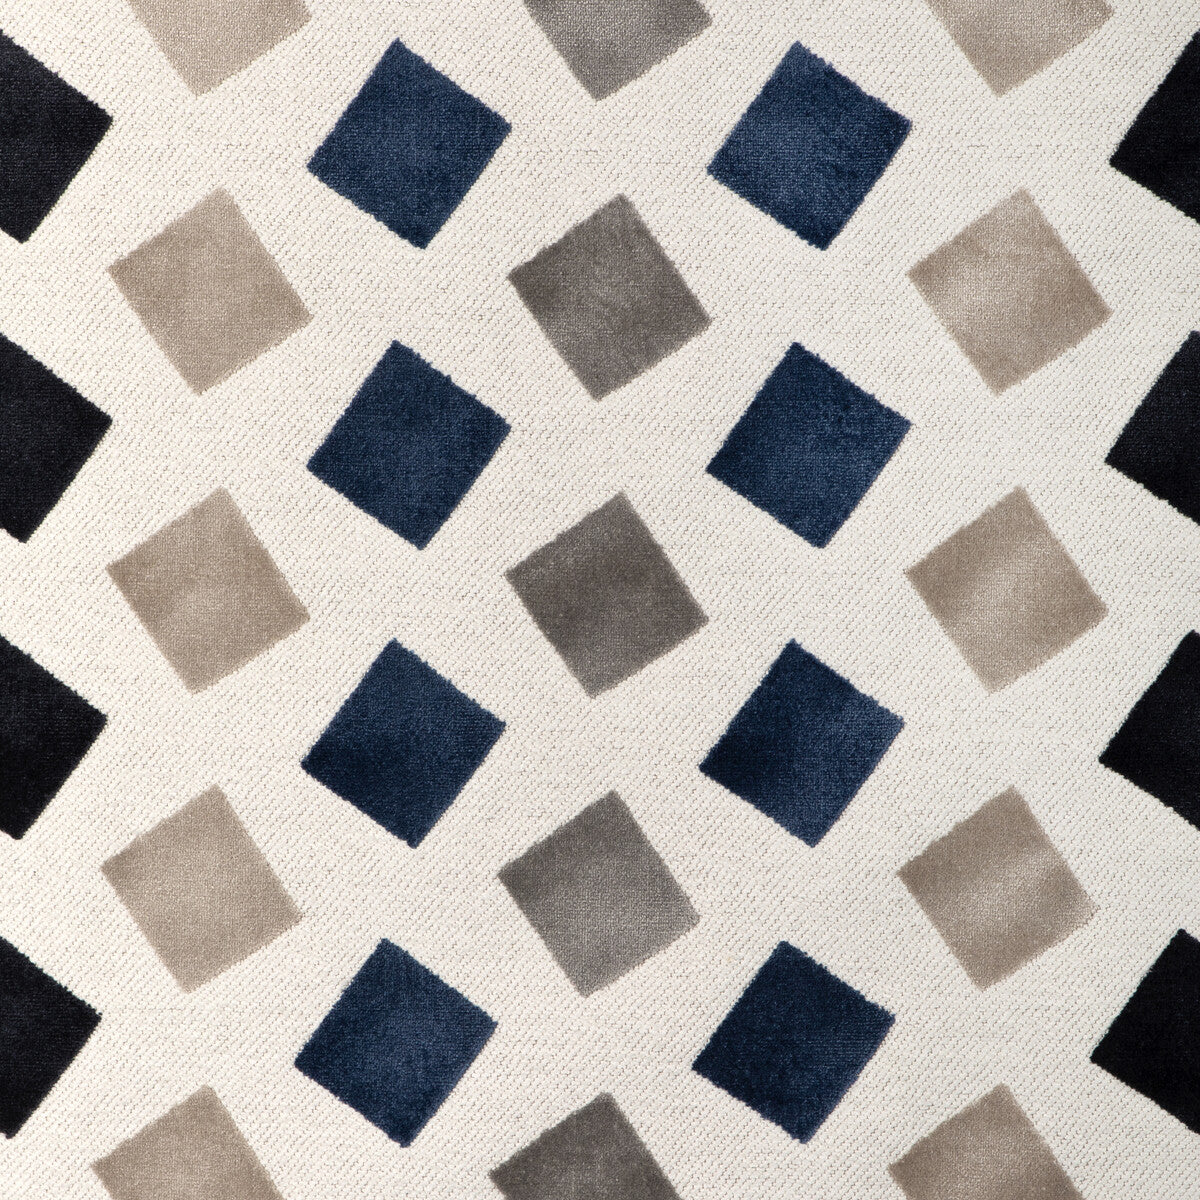 Kravet Design fabric in 36978-815 color - pattern 36978.815.0 - by Kravet Design in the Woven Colors collection